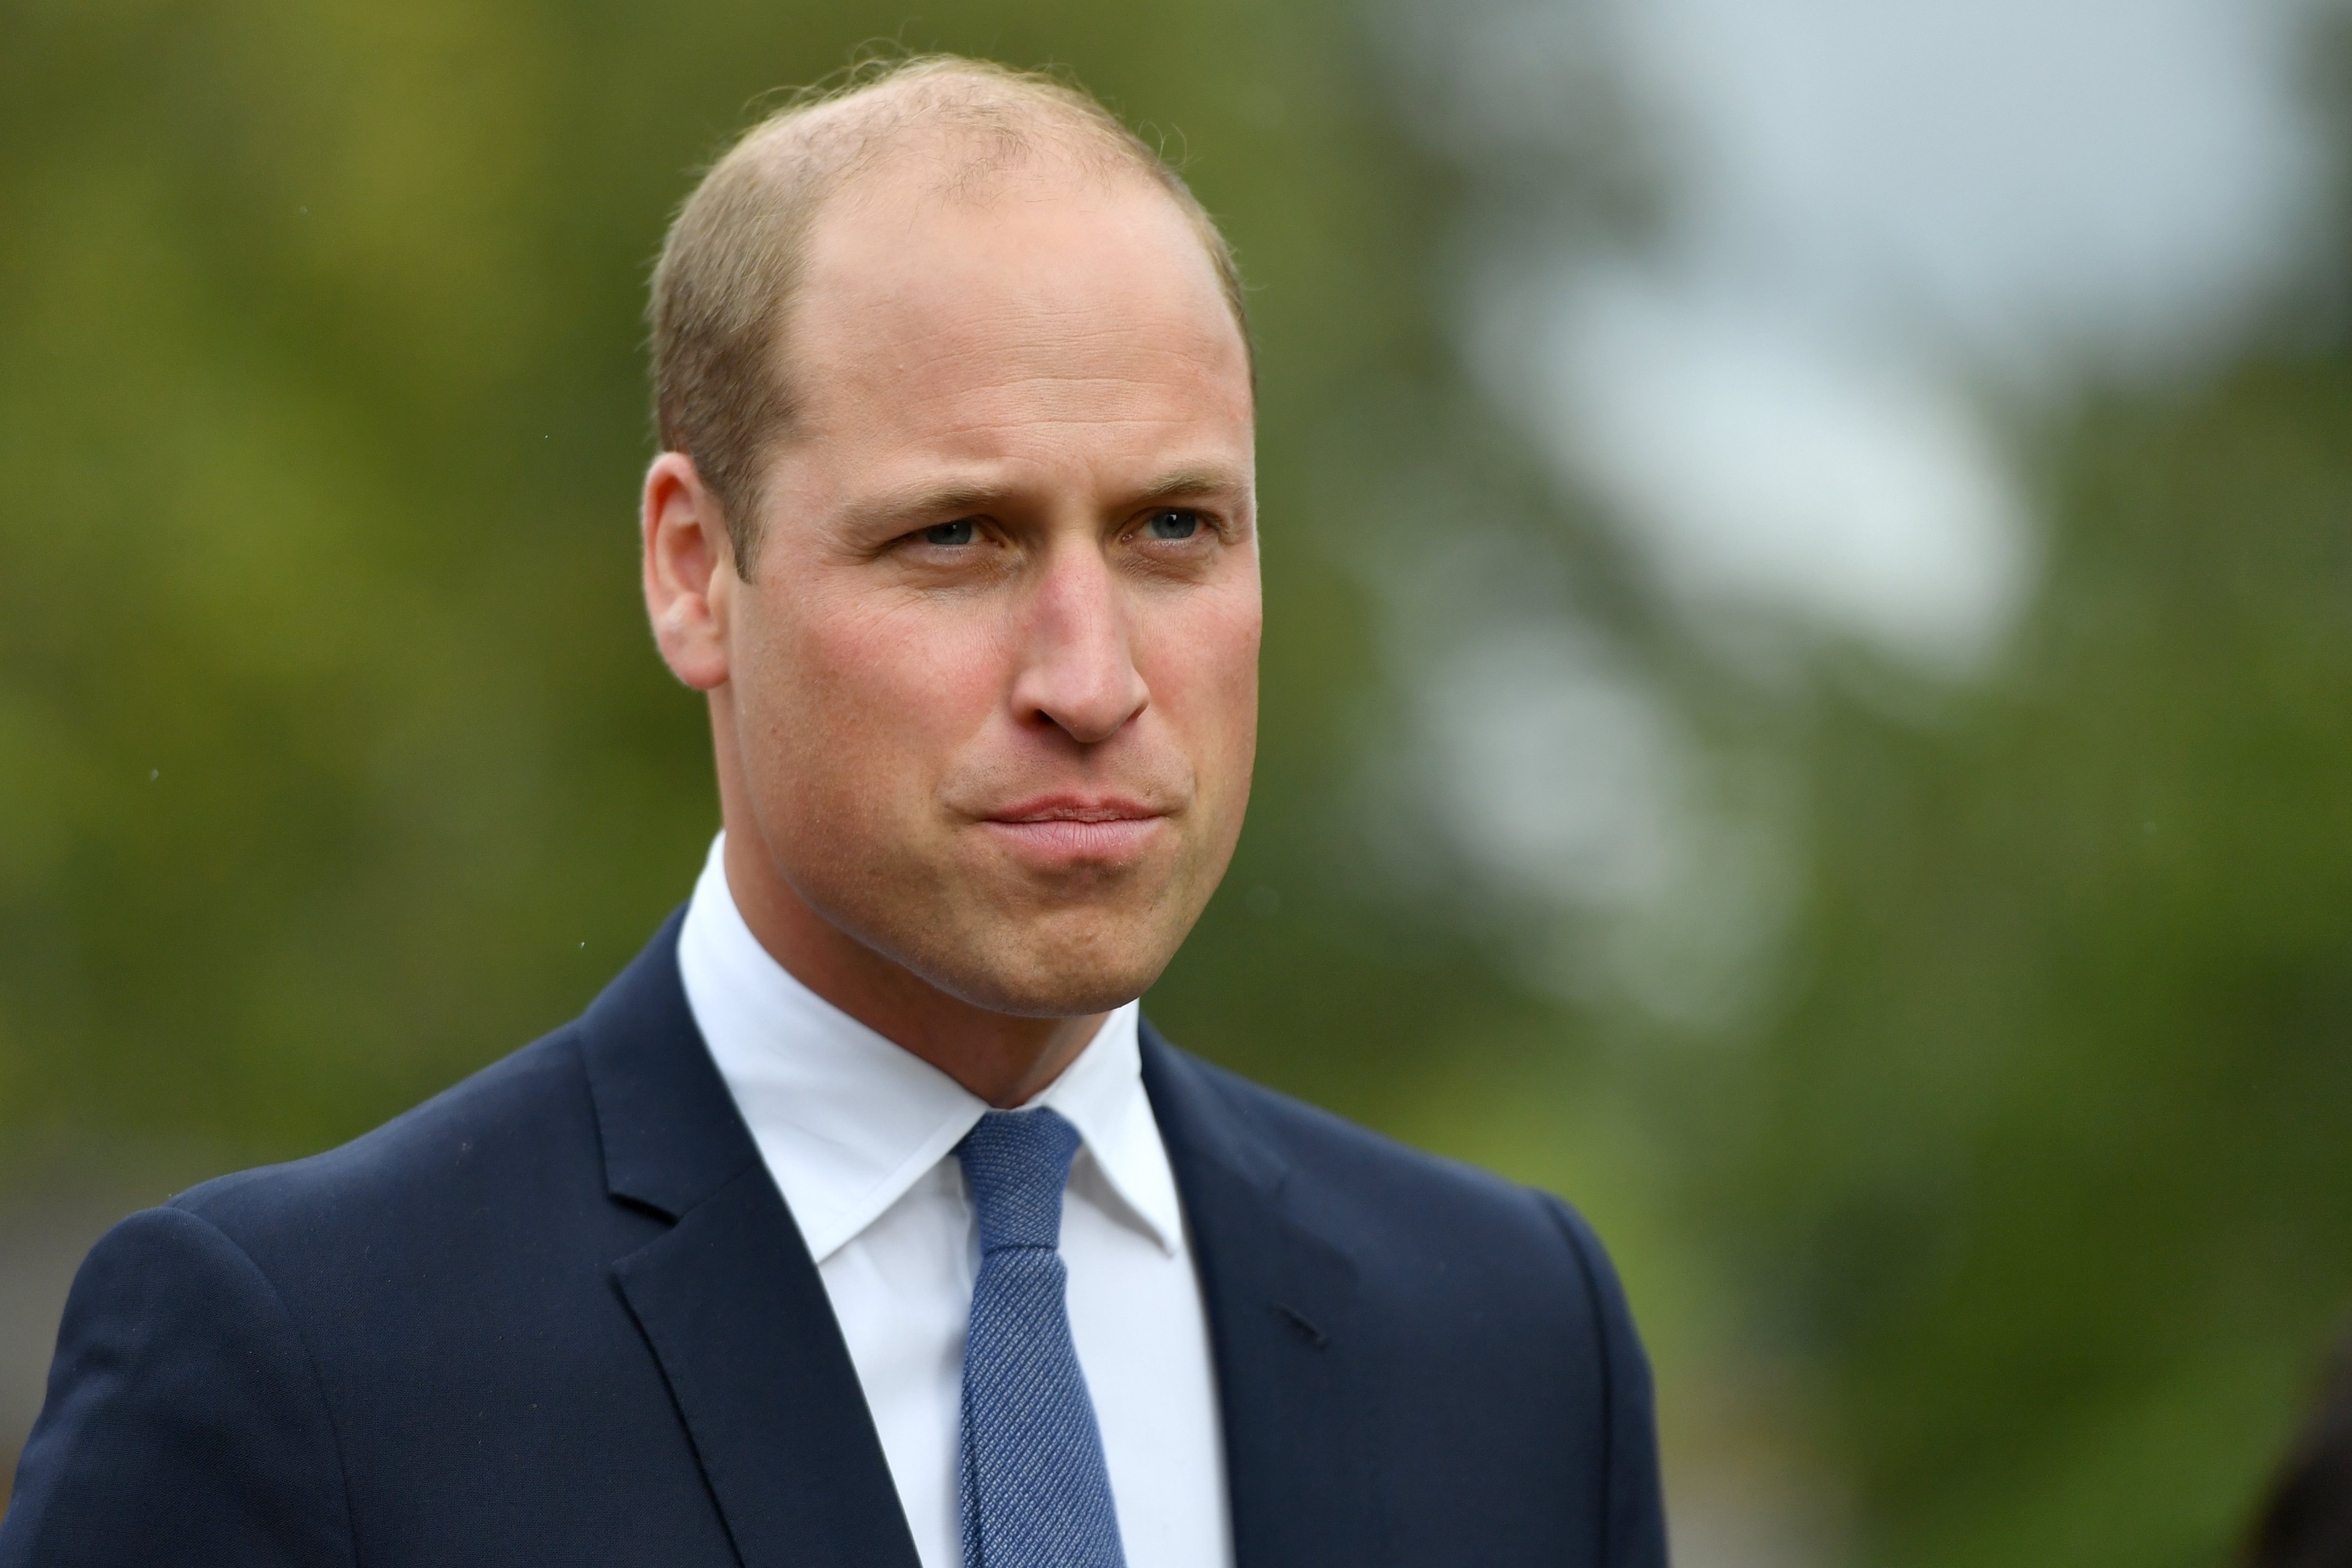 Prince William speaking with families of those helped by Major Frank Foley on September 18, 2018 in Stourbridge, United Kingdom. / Source: Getty Images